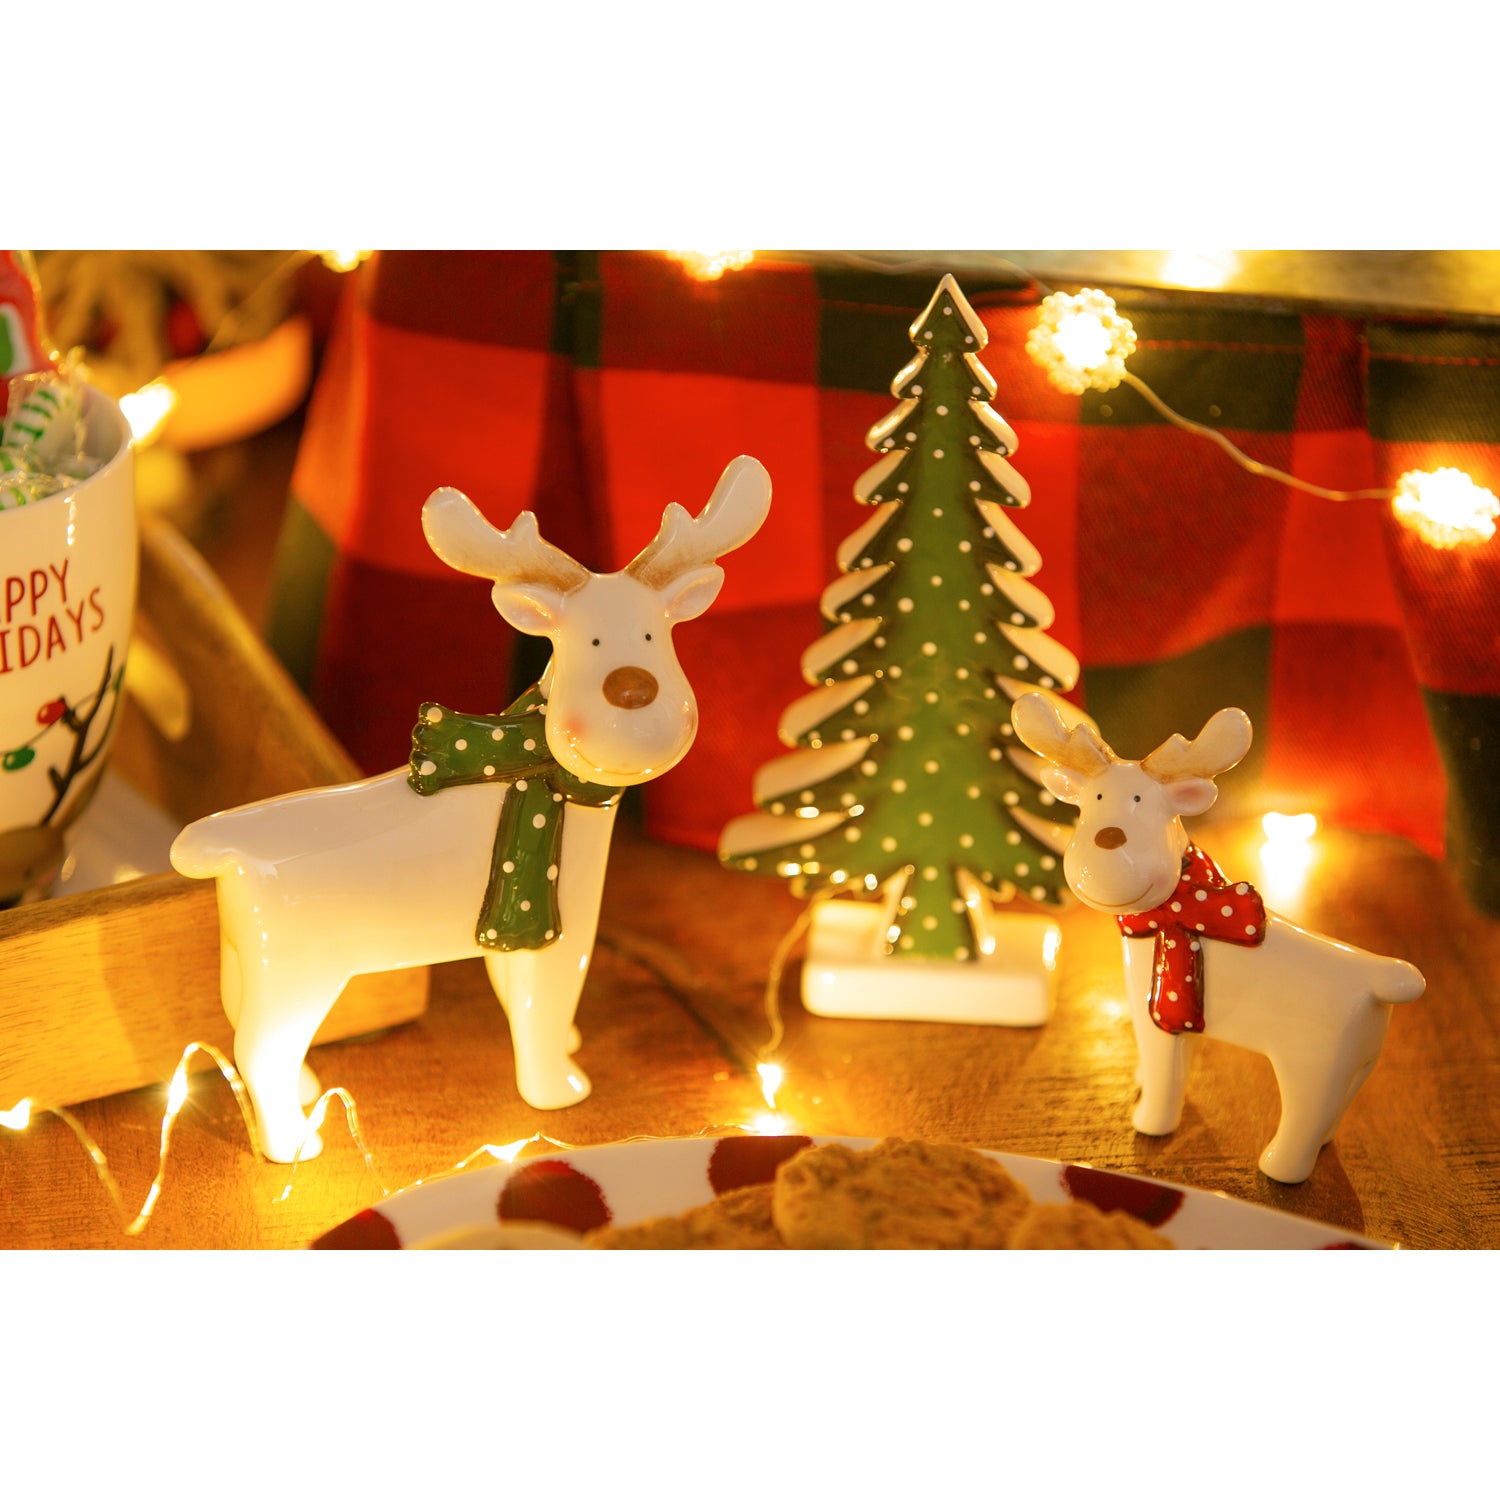 Large Reindeer, Small Reindeer and Christmas Tree set of 3 - Lake Norman Gifts